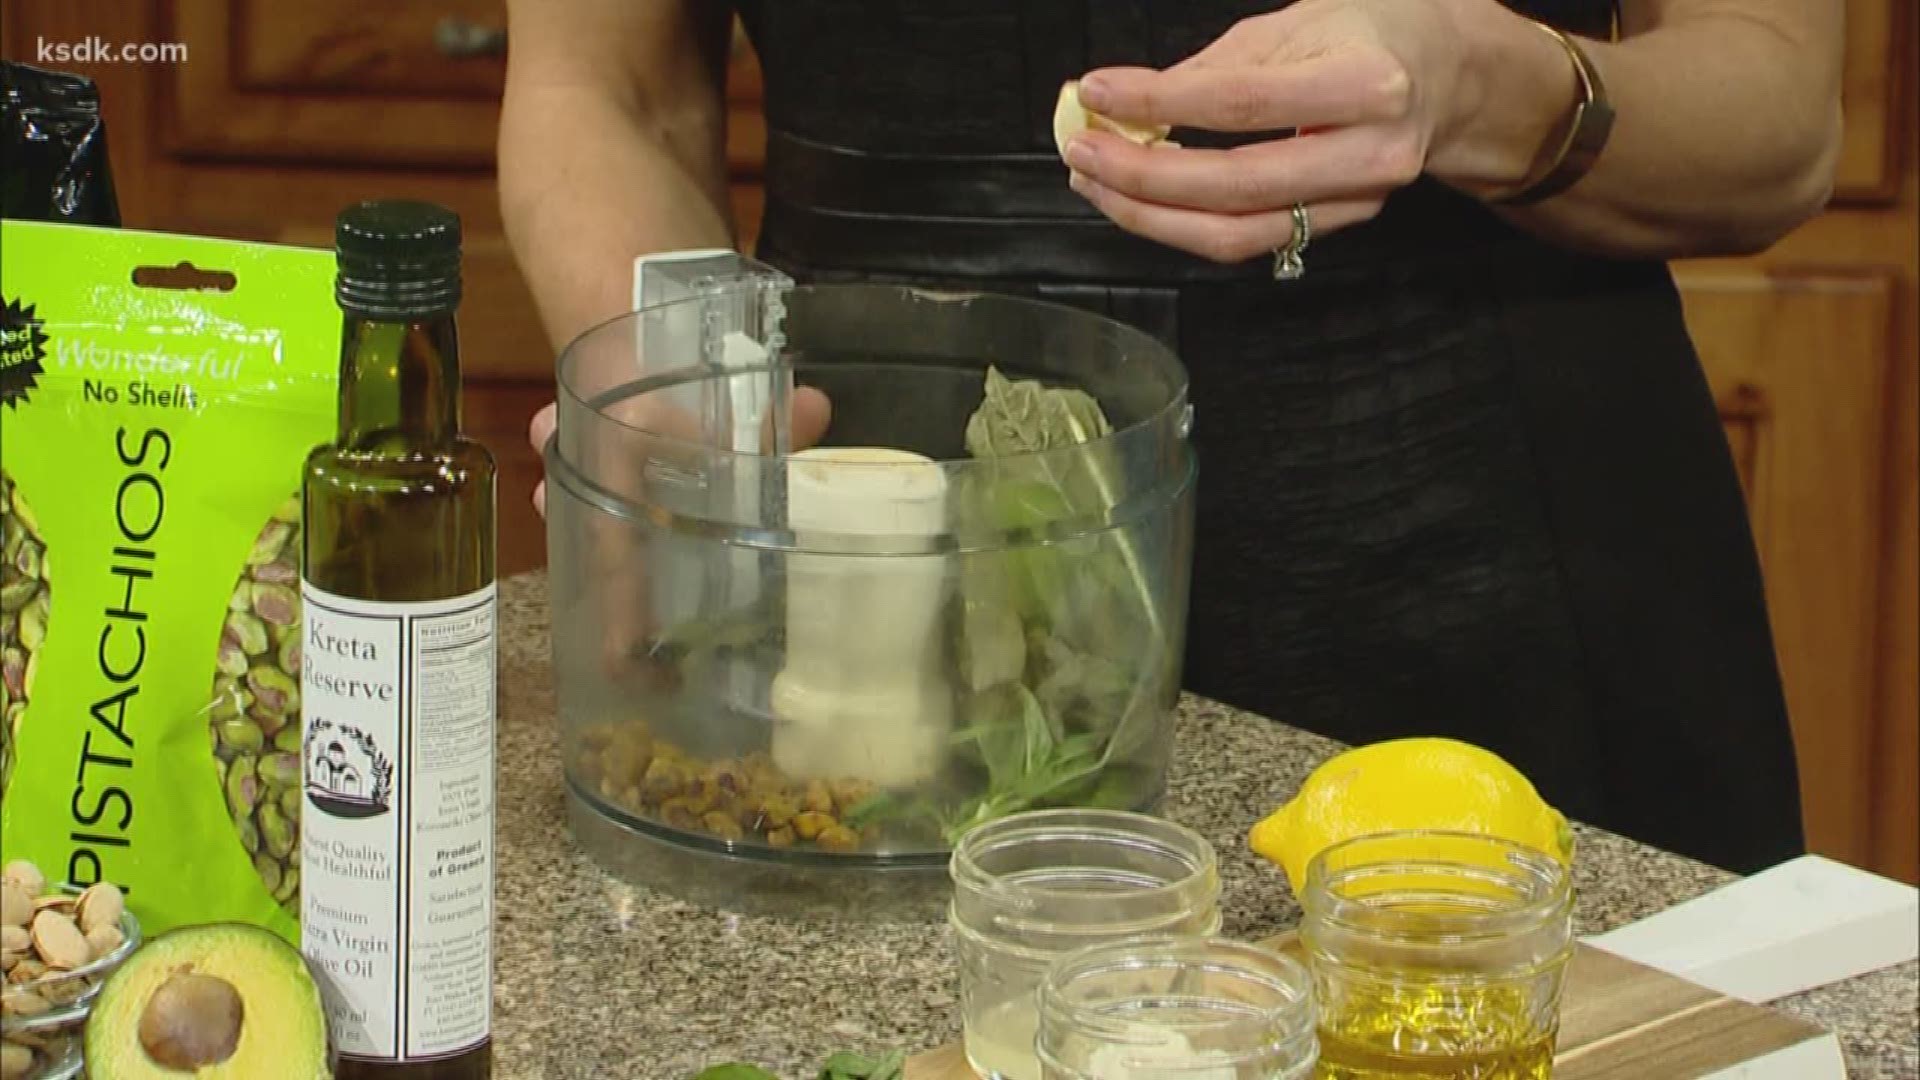 Recipe by Christy Wilson, RD and presented by Jennifer McDaniel of McDaniel Nutrition Therapy